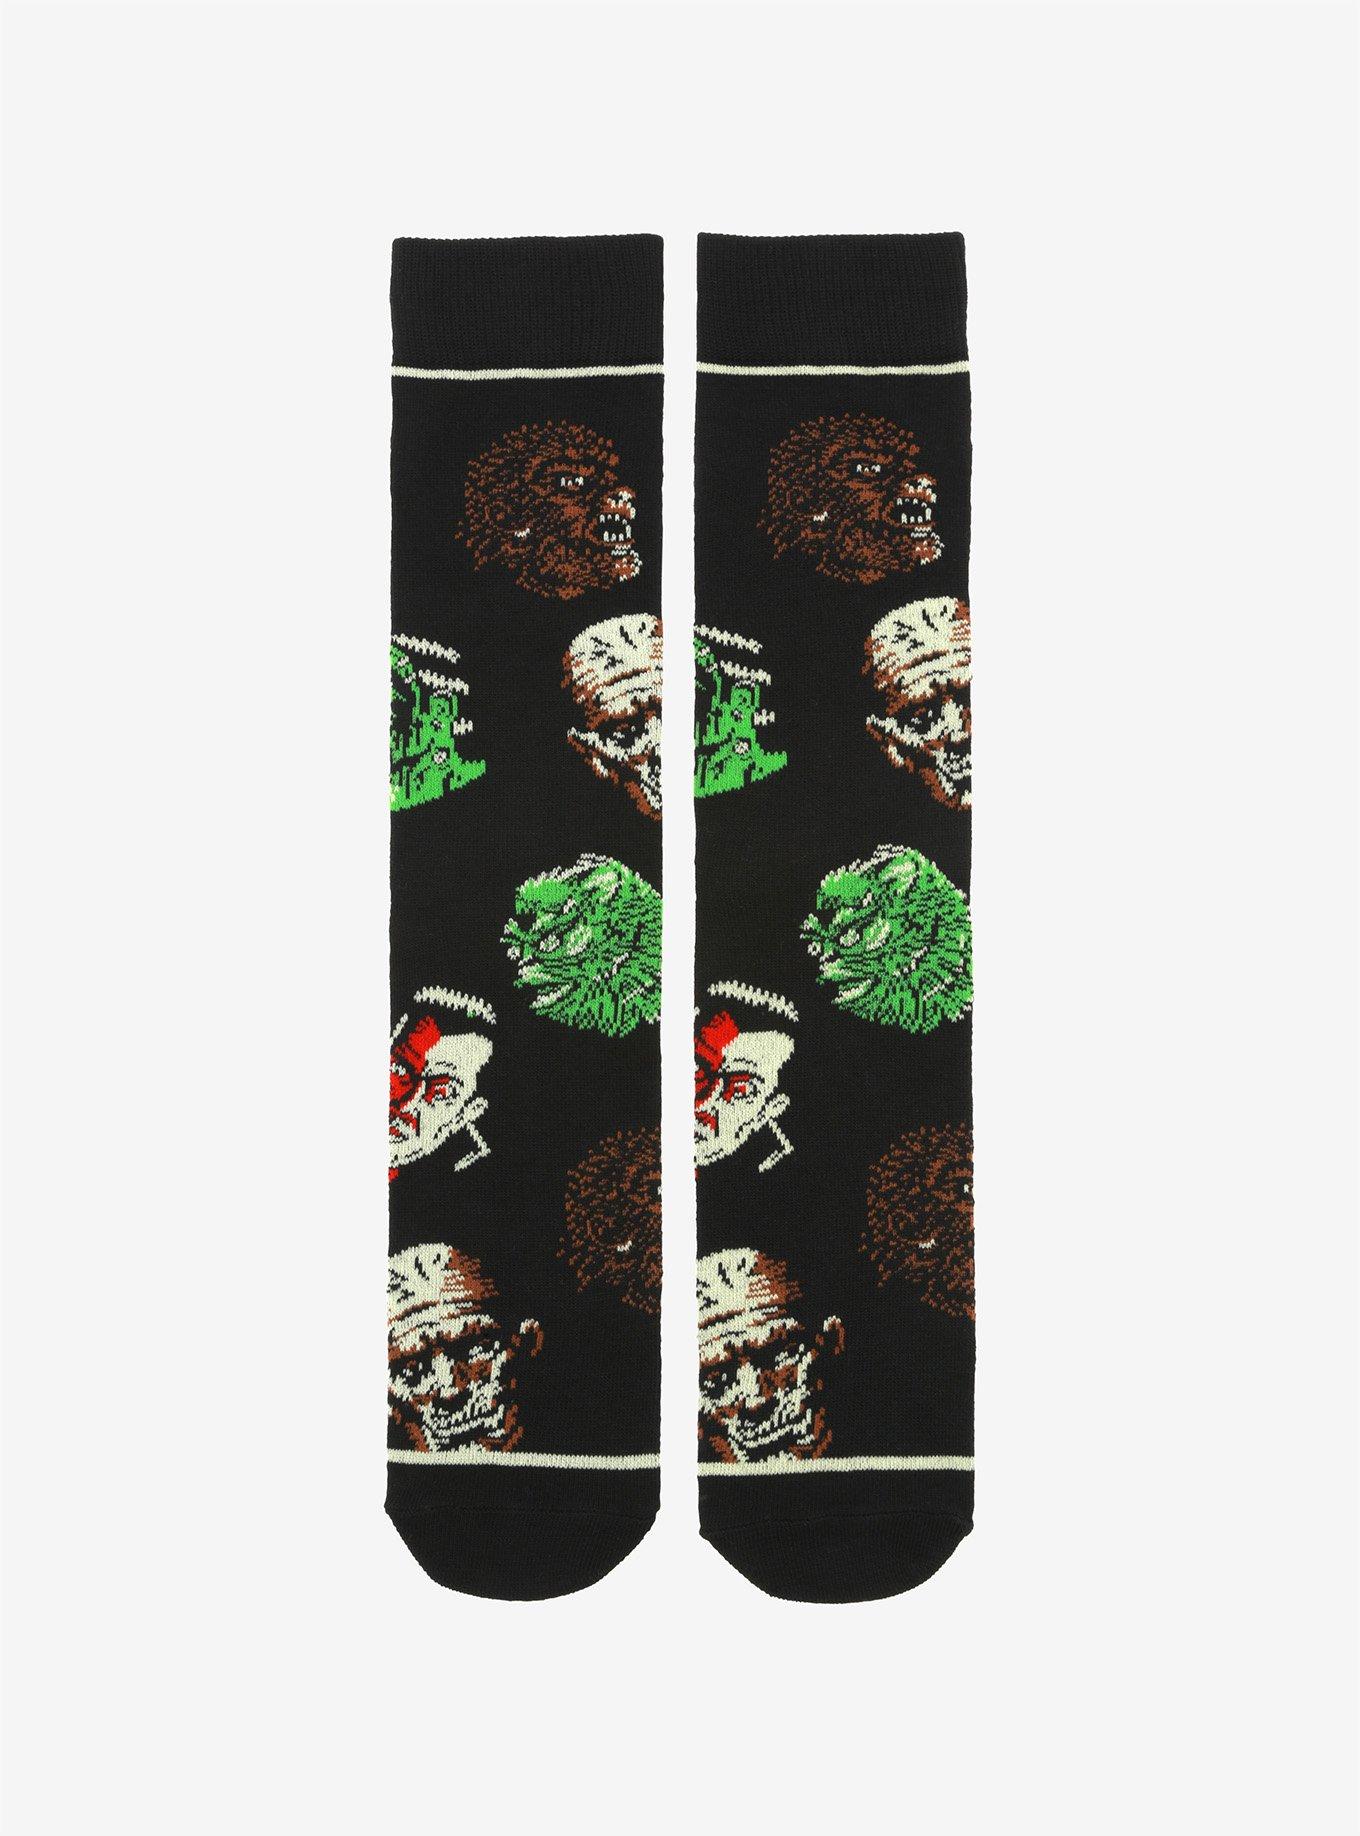 Universal Monsters Faces Crew Socks | Hot Topic